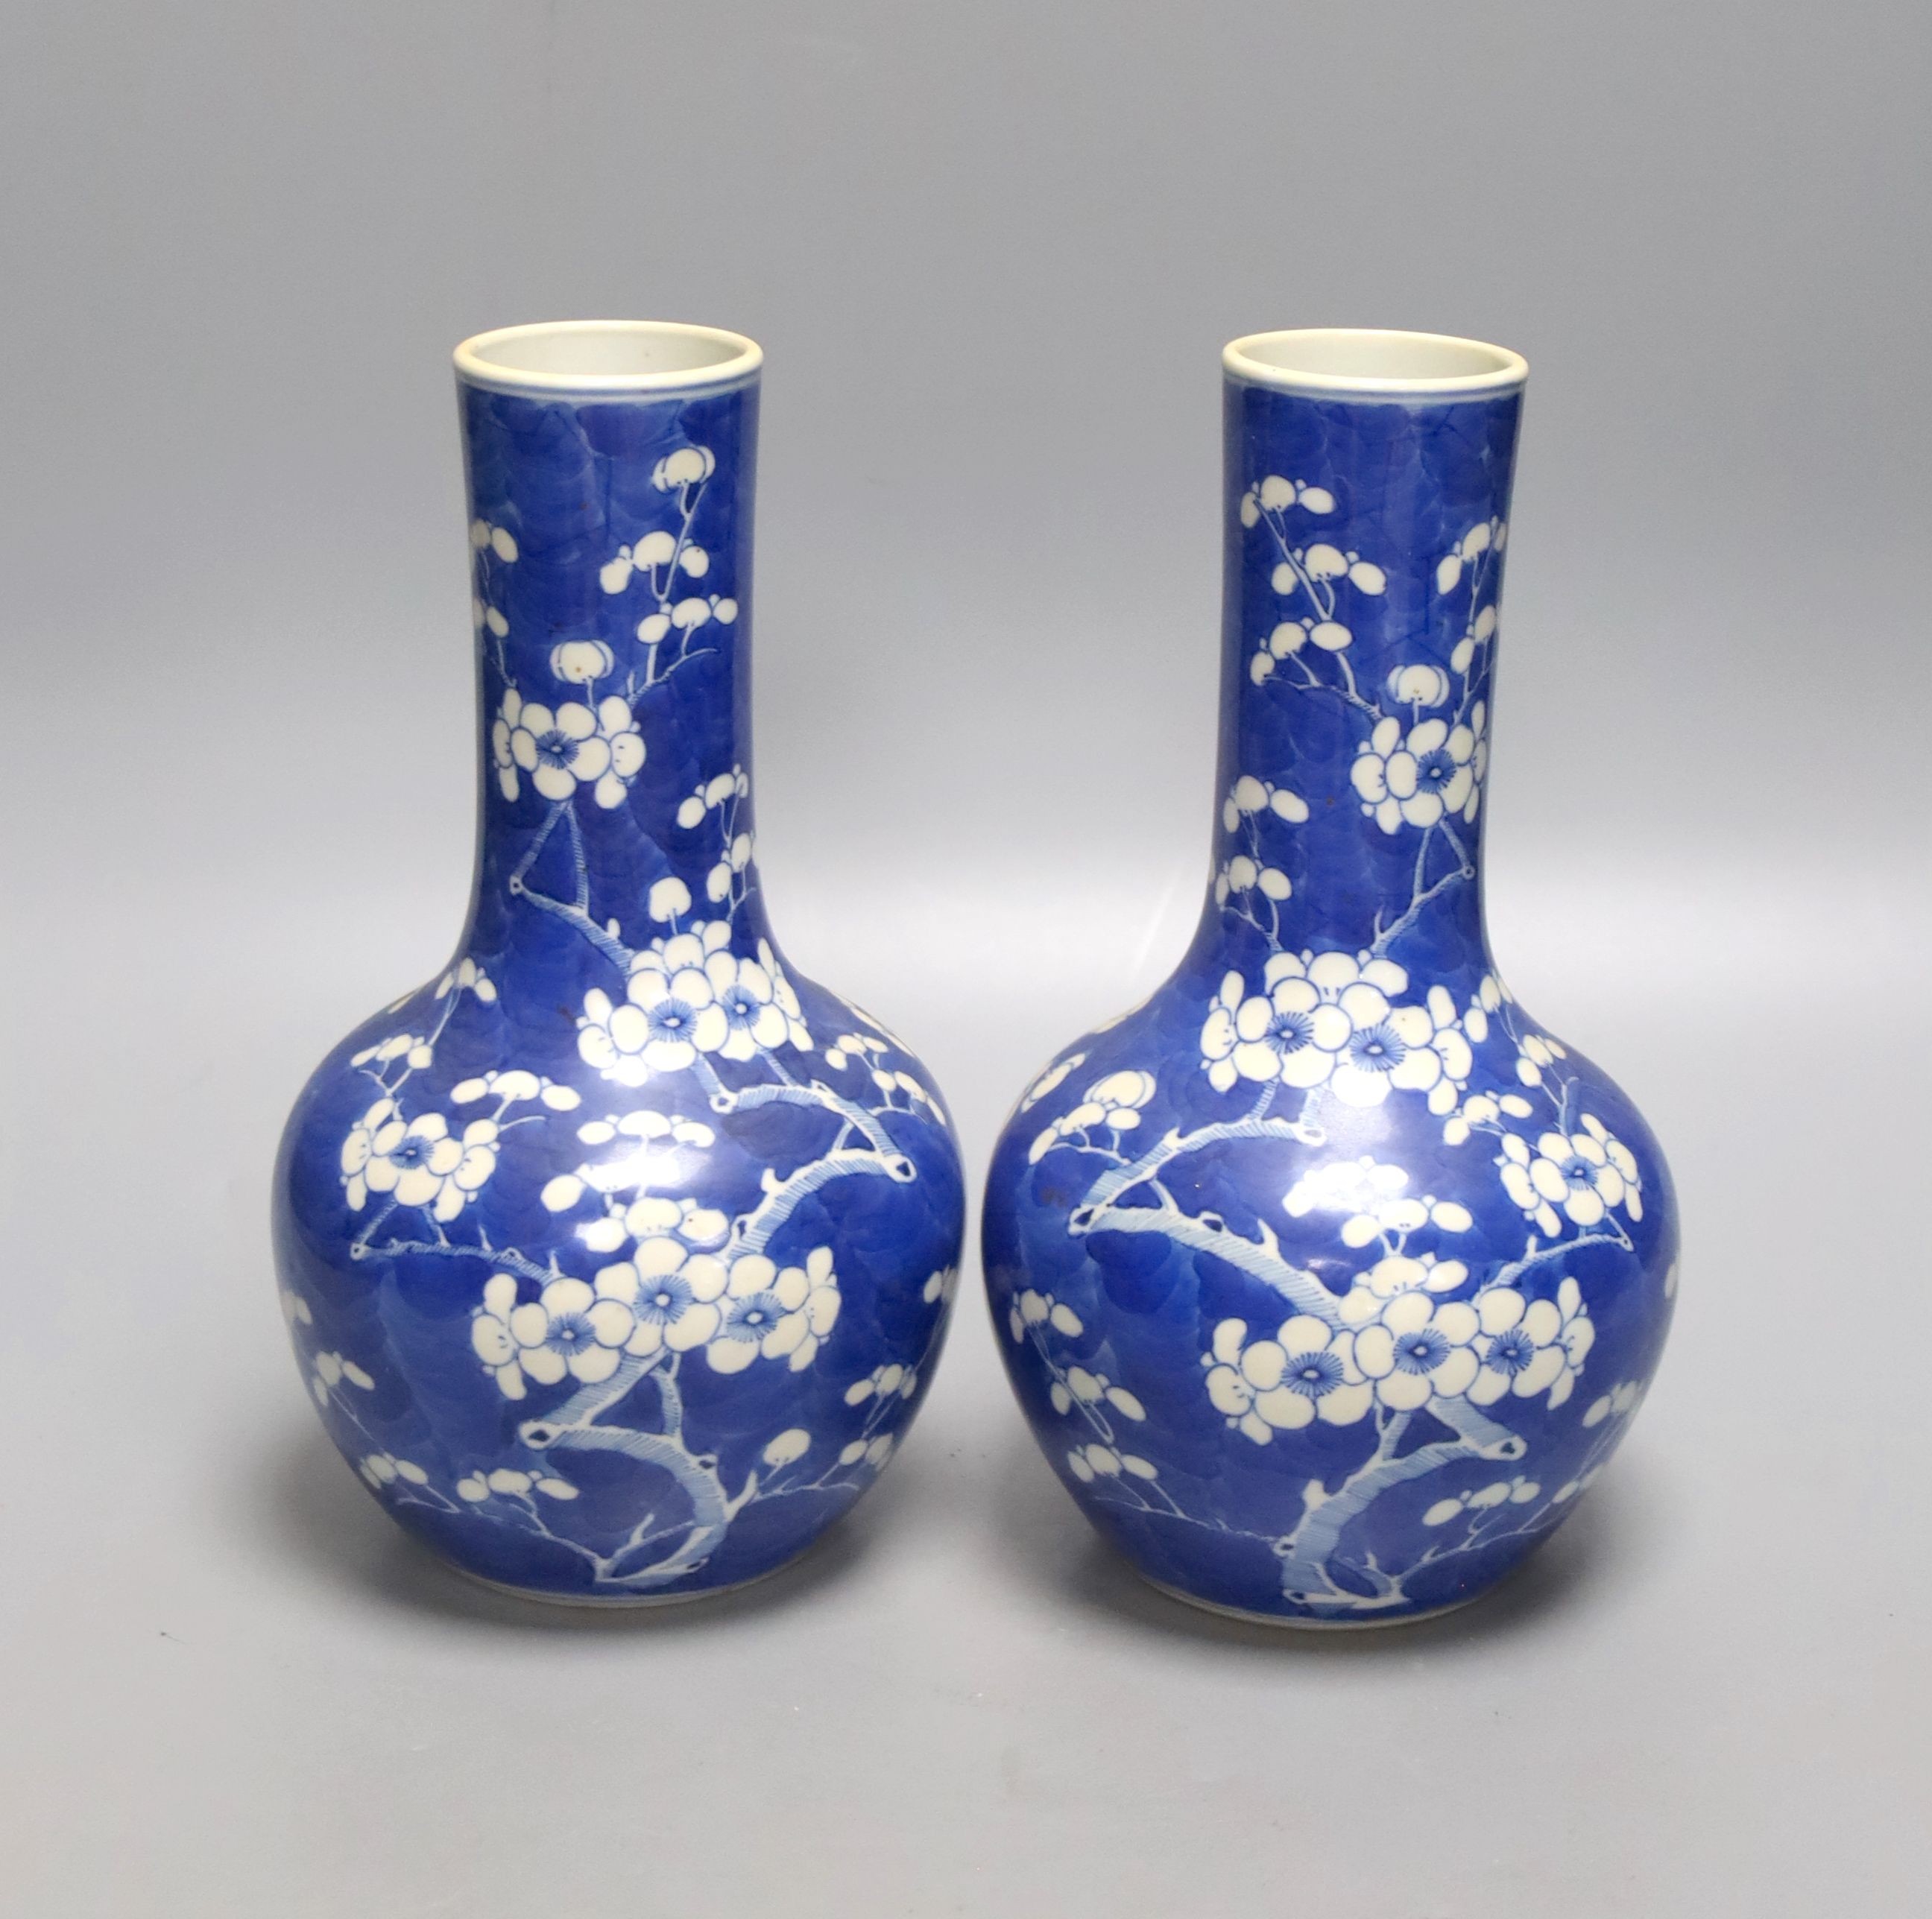 A pair of 19th century Chinese blue and white porcelain prunus vases, height 22cm